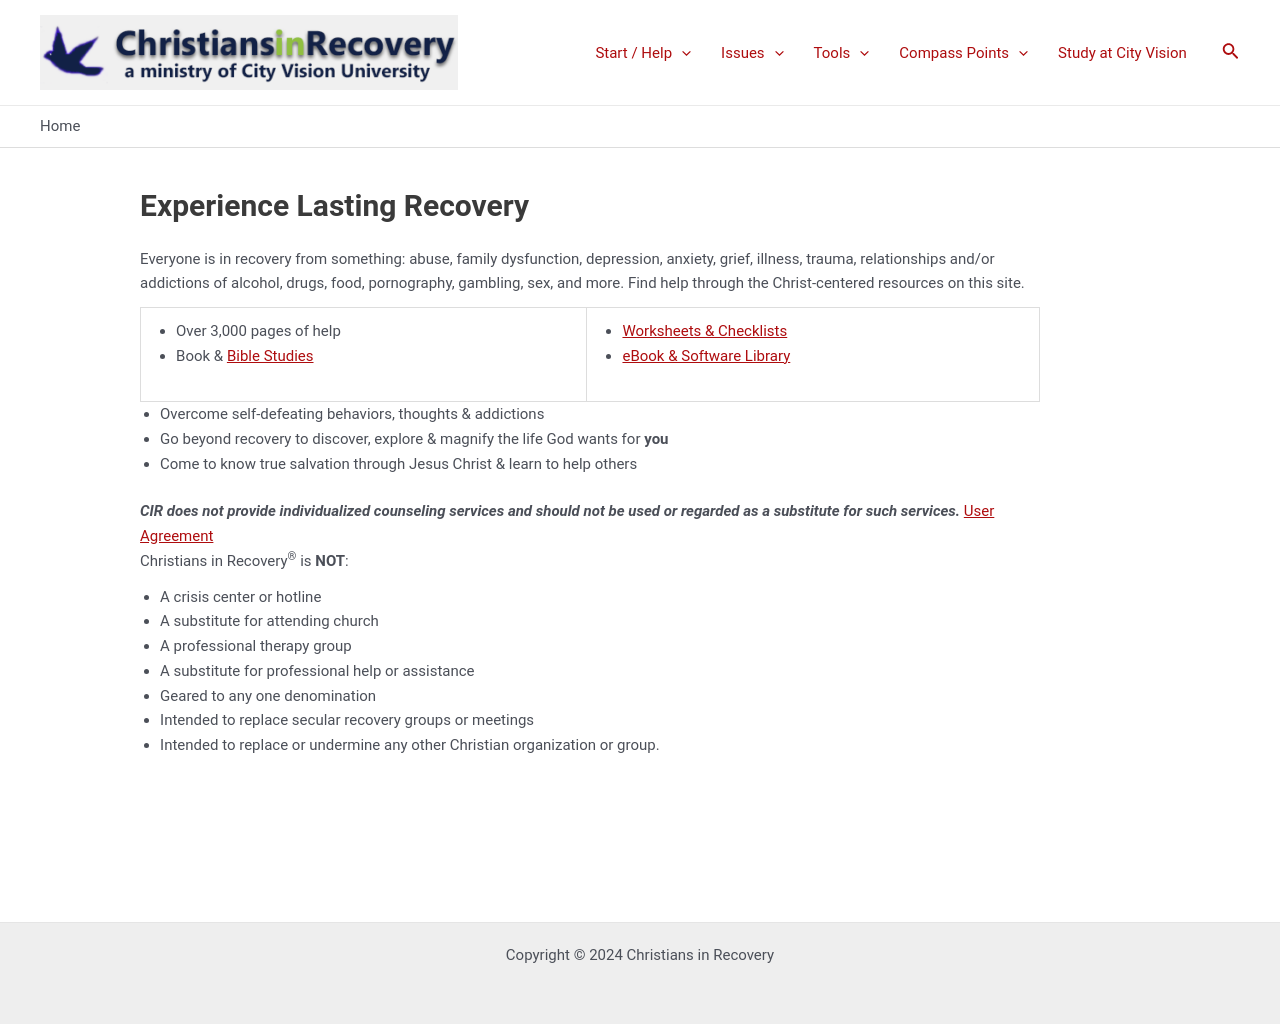 christians-in-recovery.org